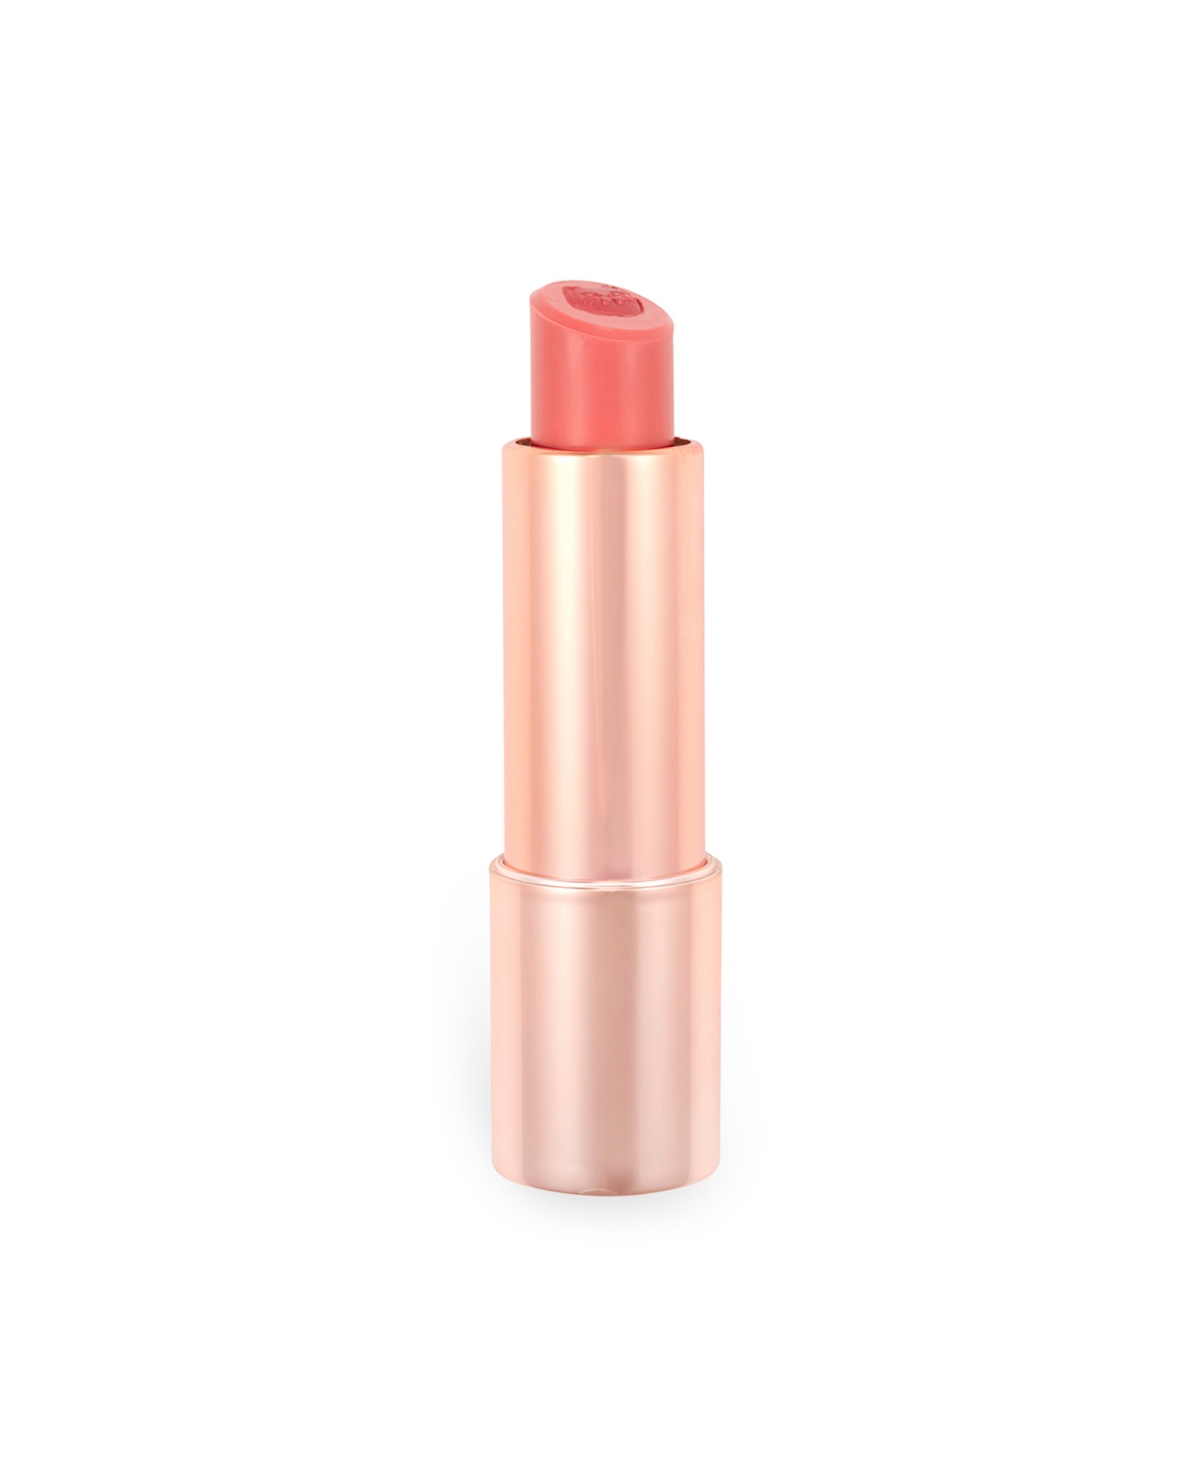 Purrfect Pout Lipstick - Pawsh - sheer nude